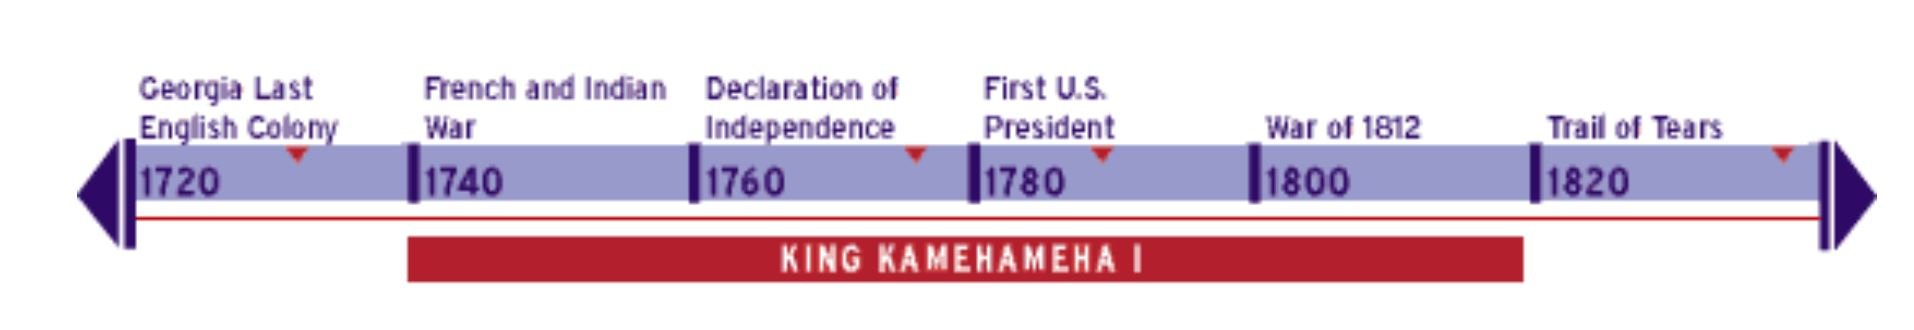 Timeline depicting the life of King Kamehameha I to the history of the United States